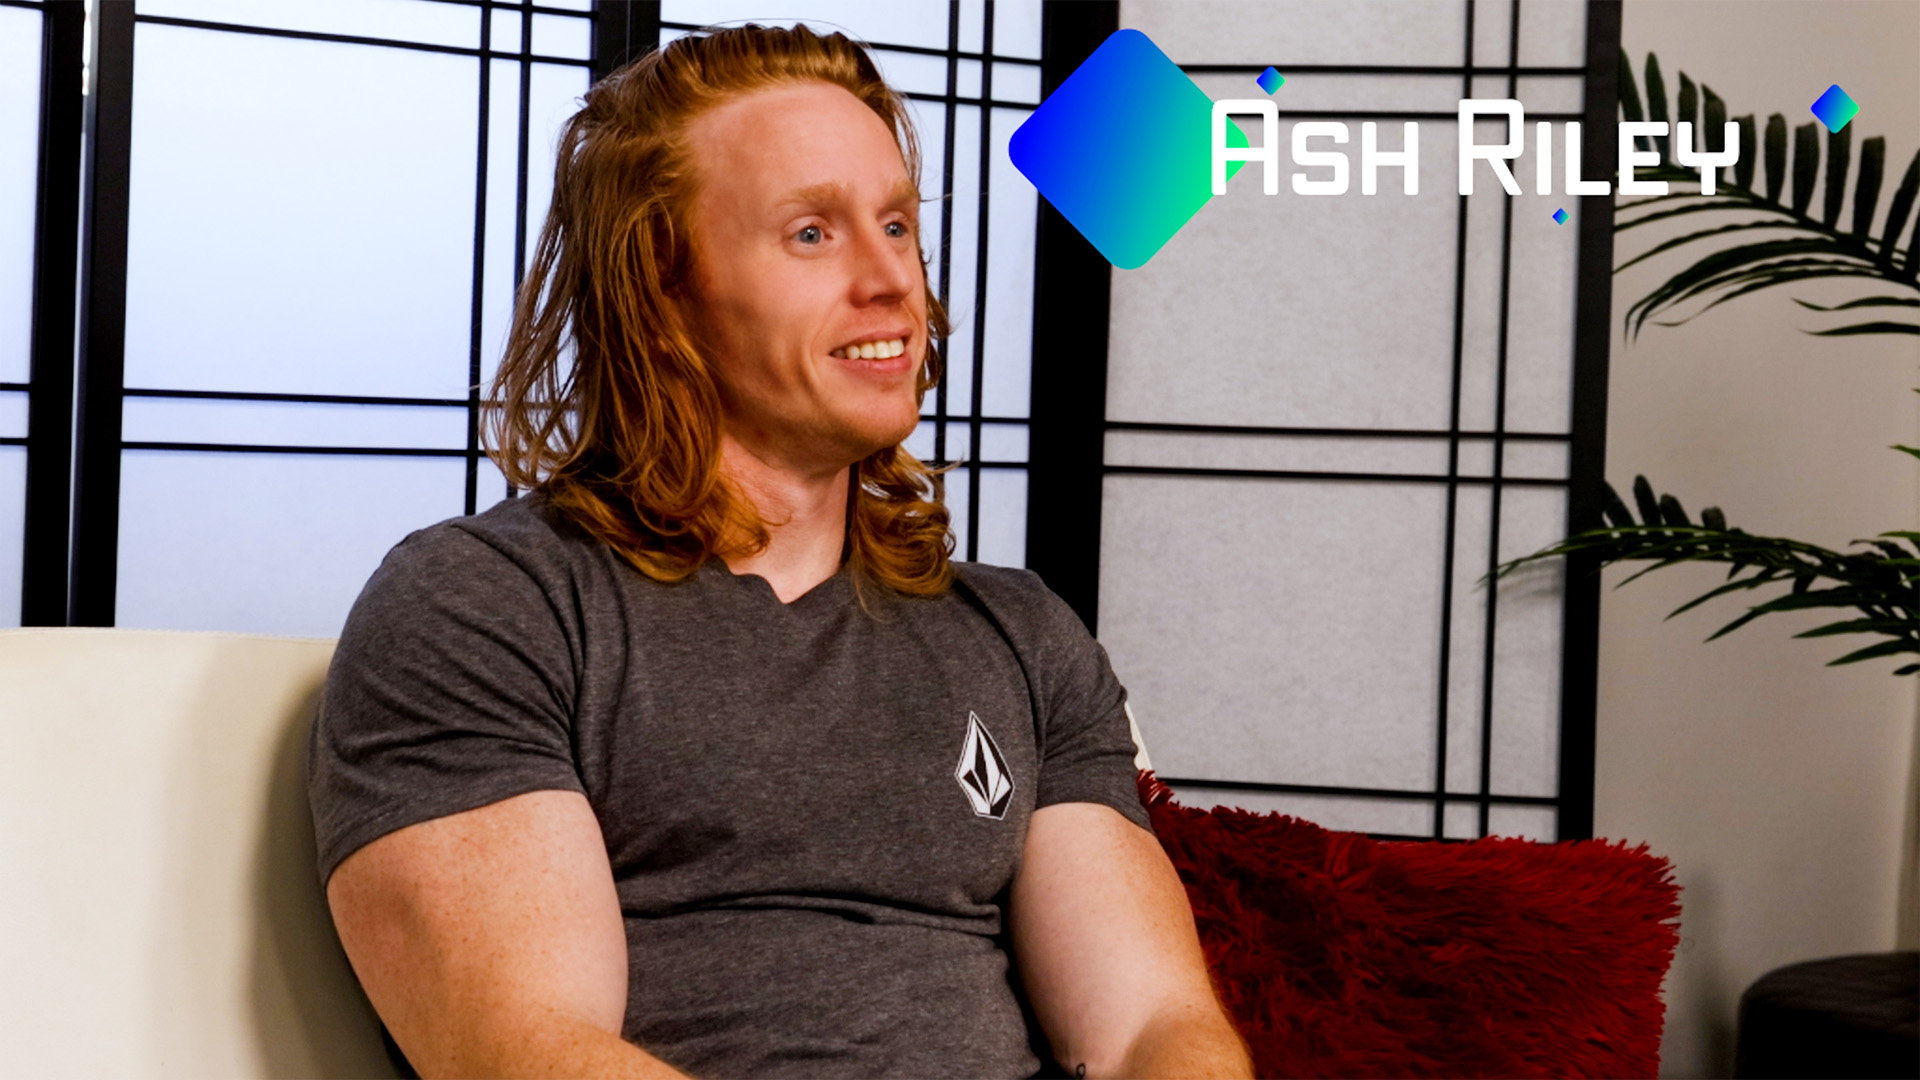 Redhead Hunk Ash Riley Has Some Wild Stories To Tell!